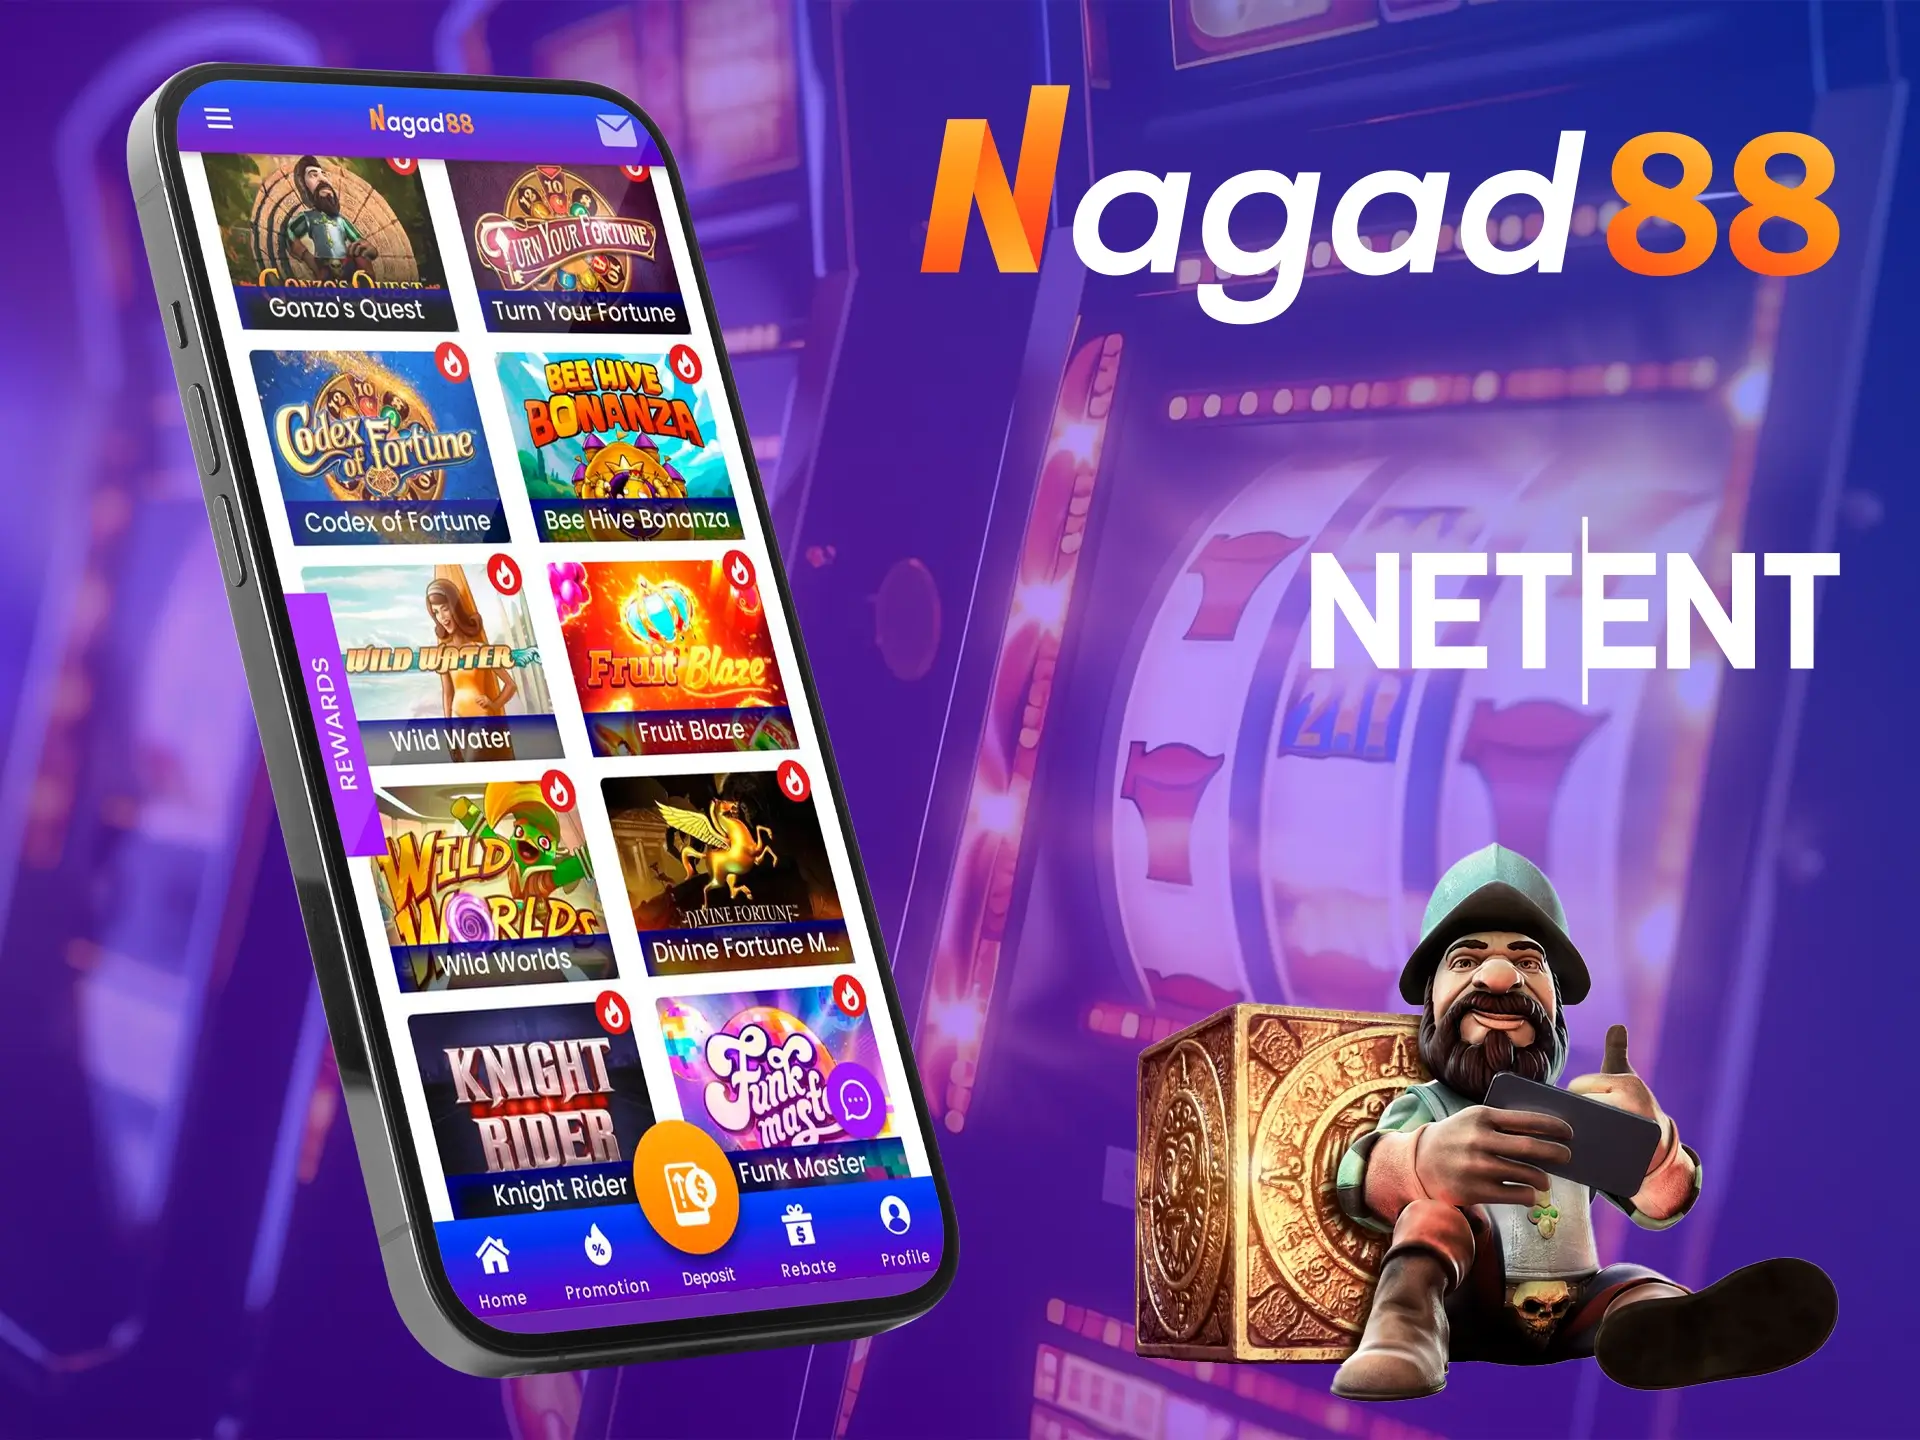 Choose your favorite slots from provider Netent to play at Nagad88.